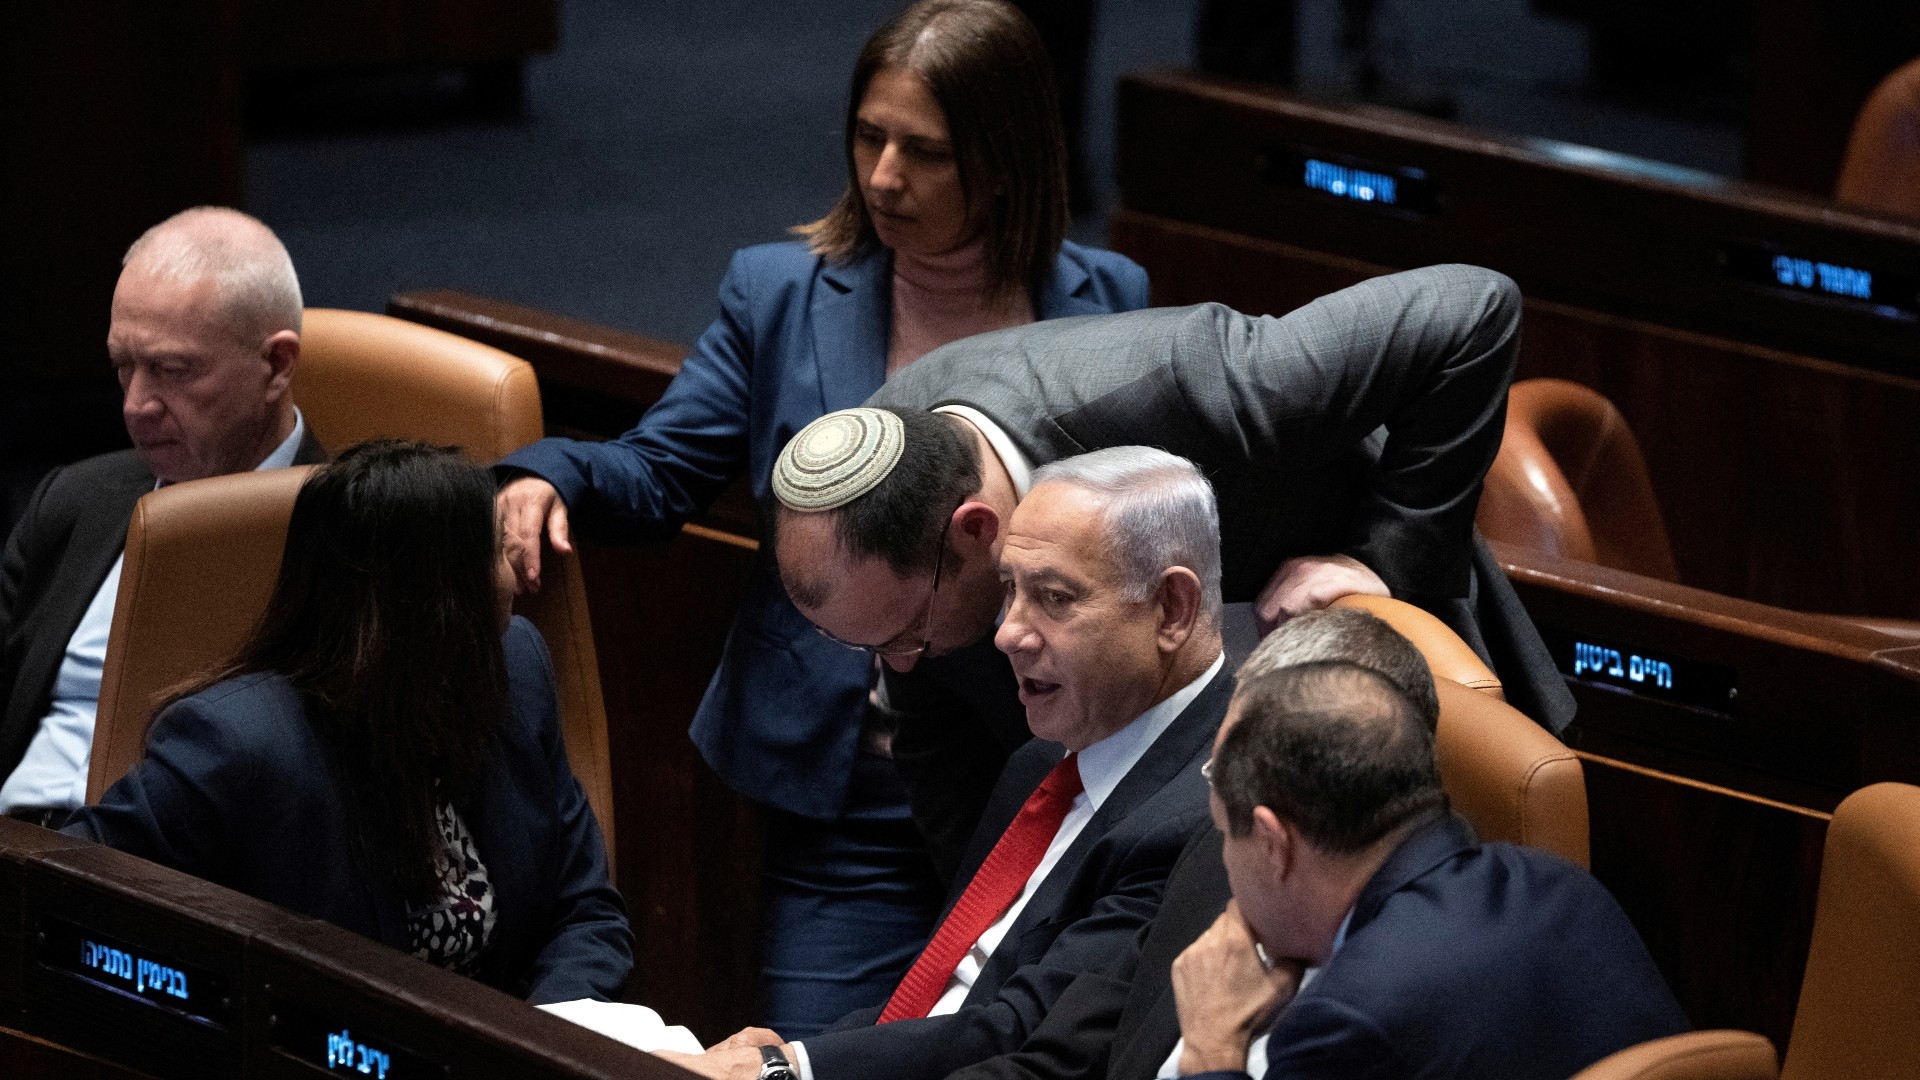 Israel's Prime Minister Benjamin Netanyahu confers with lawmakers as they convene in Israel's parliament in Jerusalem on 20 February 2023 (Reuters)